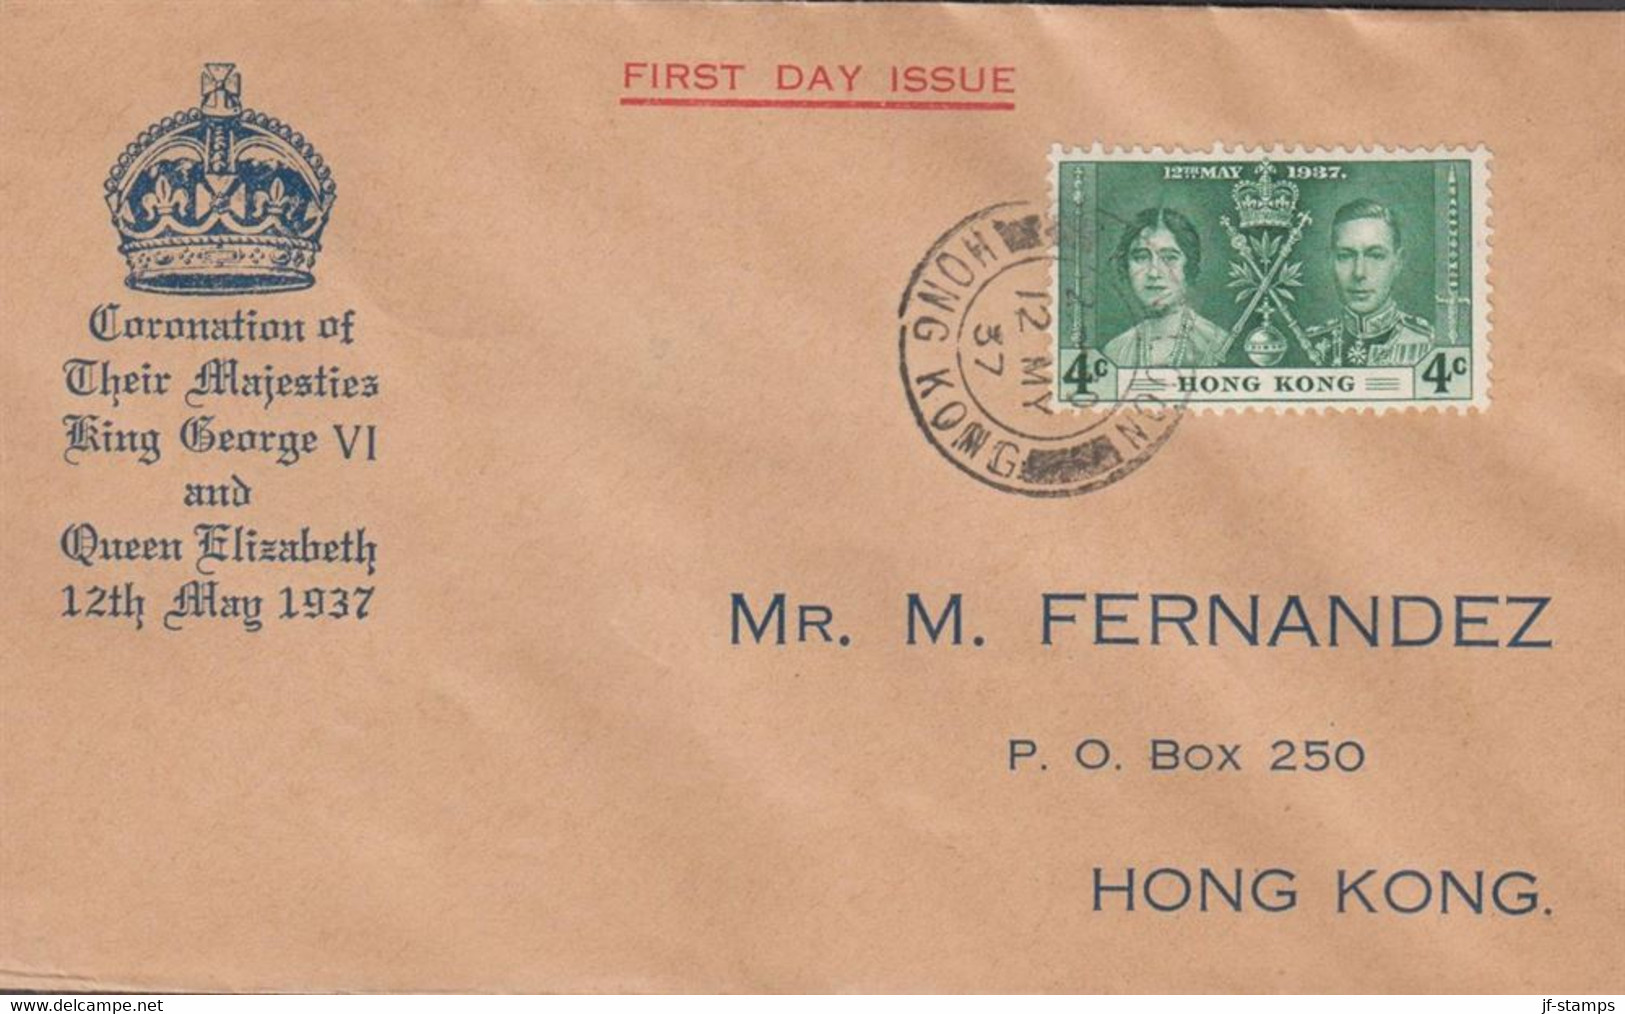 1937. HONG KONG Georg VI. 4 C Coronation On Nice FDC Cancelled FIRST DAY OF ISSUE KOWLOON HON... (Michel 136) - JF427050 - Briefe U. Dokumente